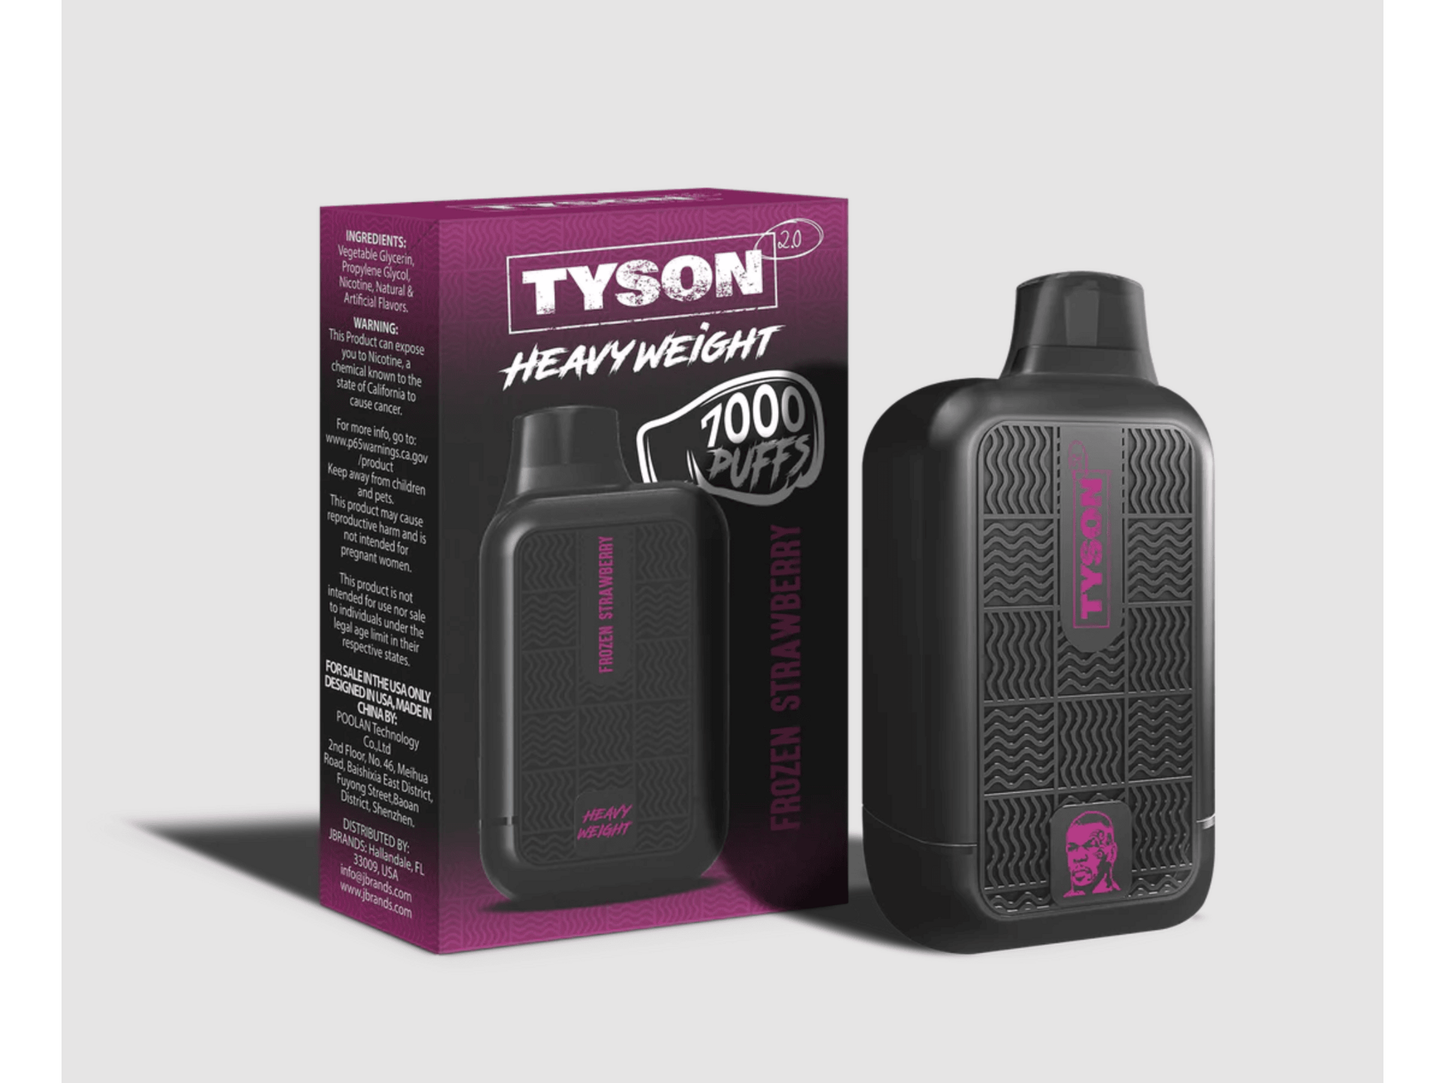 Tyson Heavyweight Frozen Strawberry flavored disposable vape device and box.